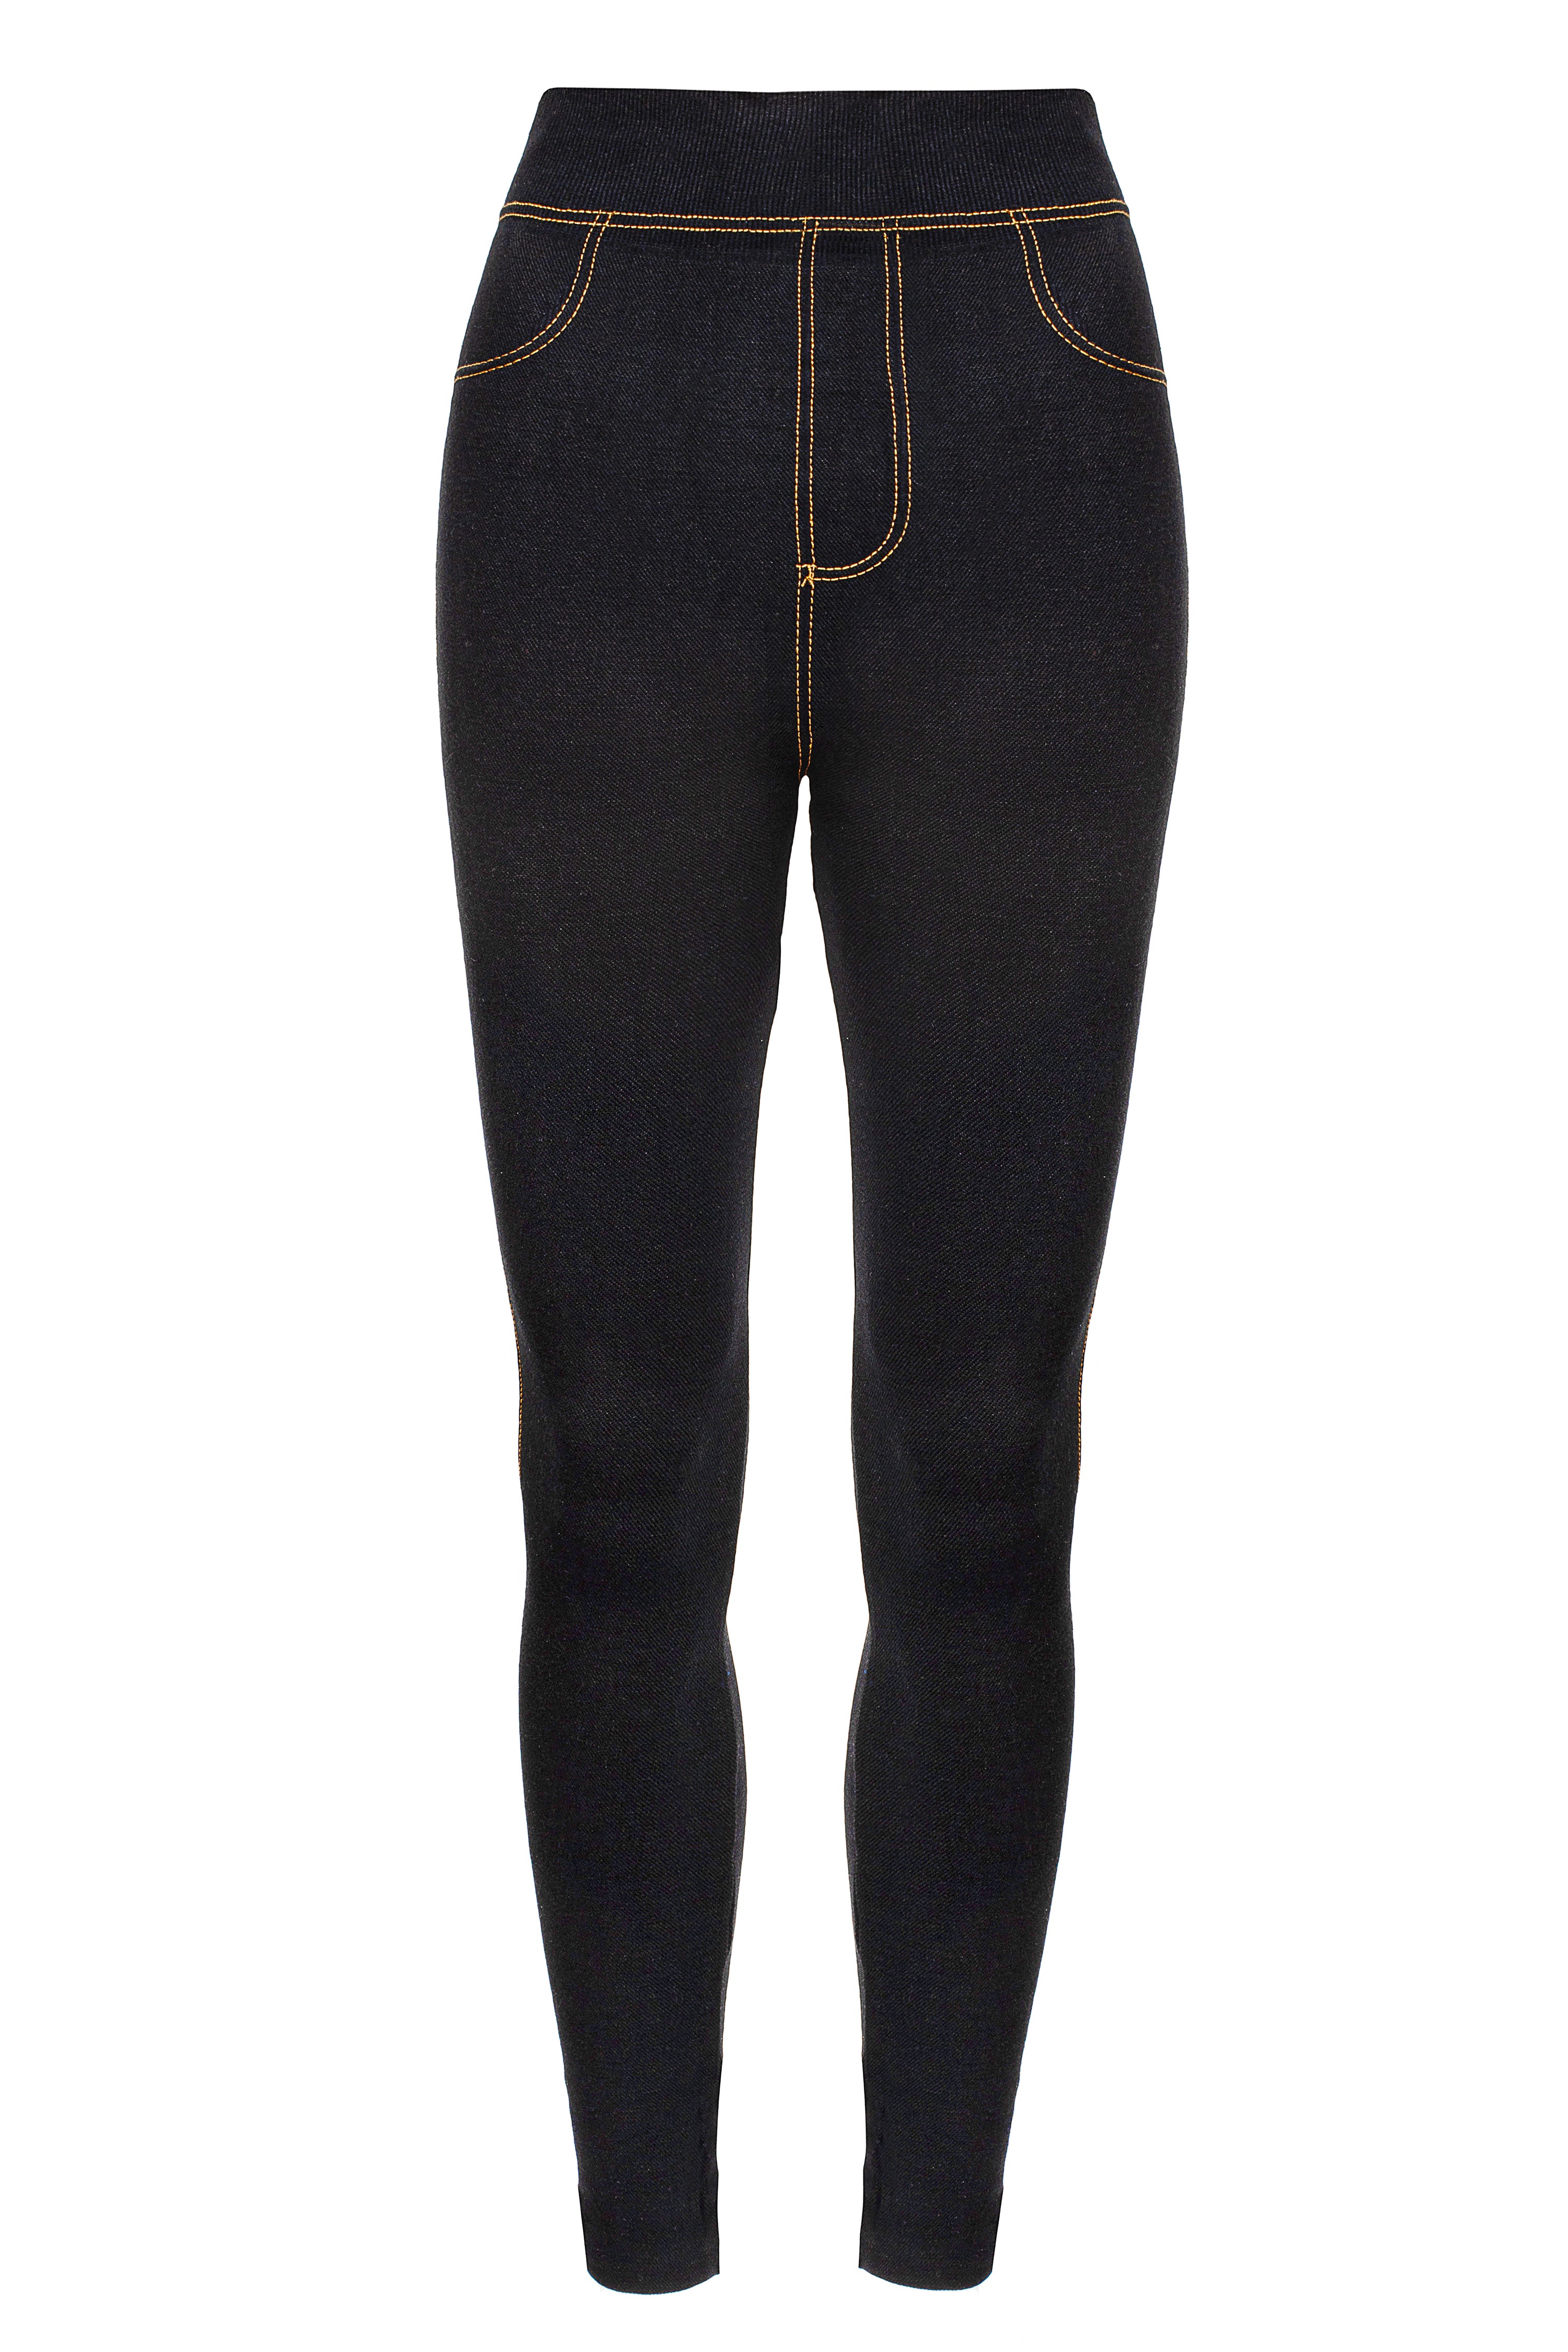 Up To 44% Off One or Two Ultra-Thick Fleece-Lined Jeggings